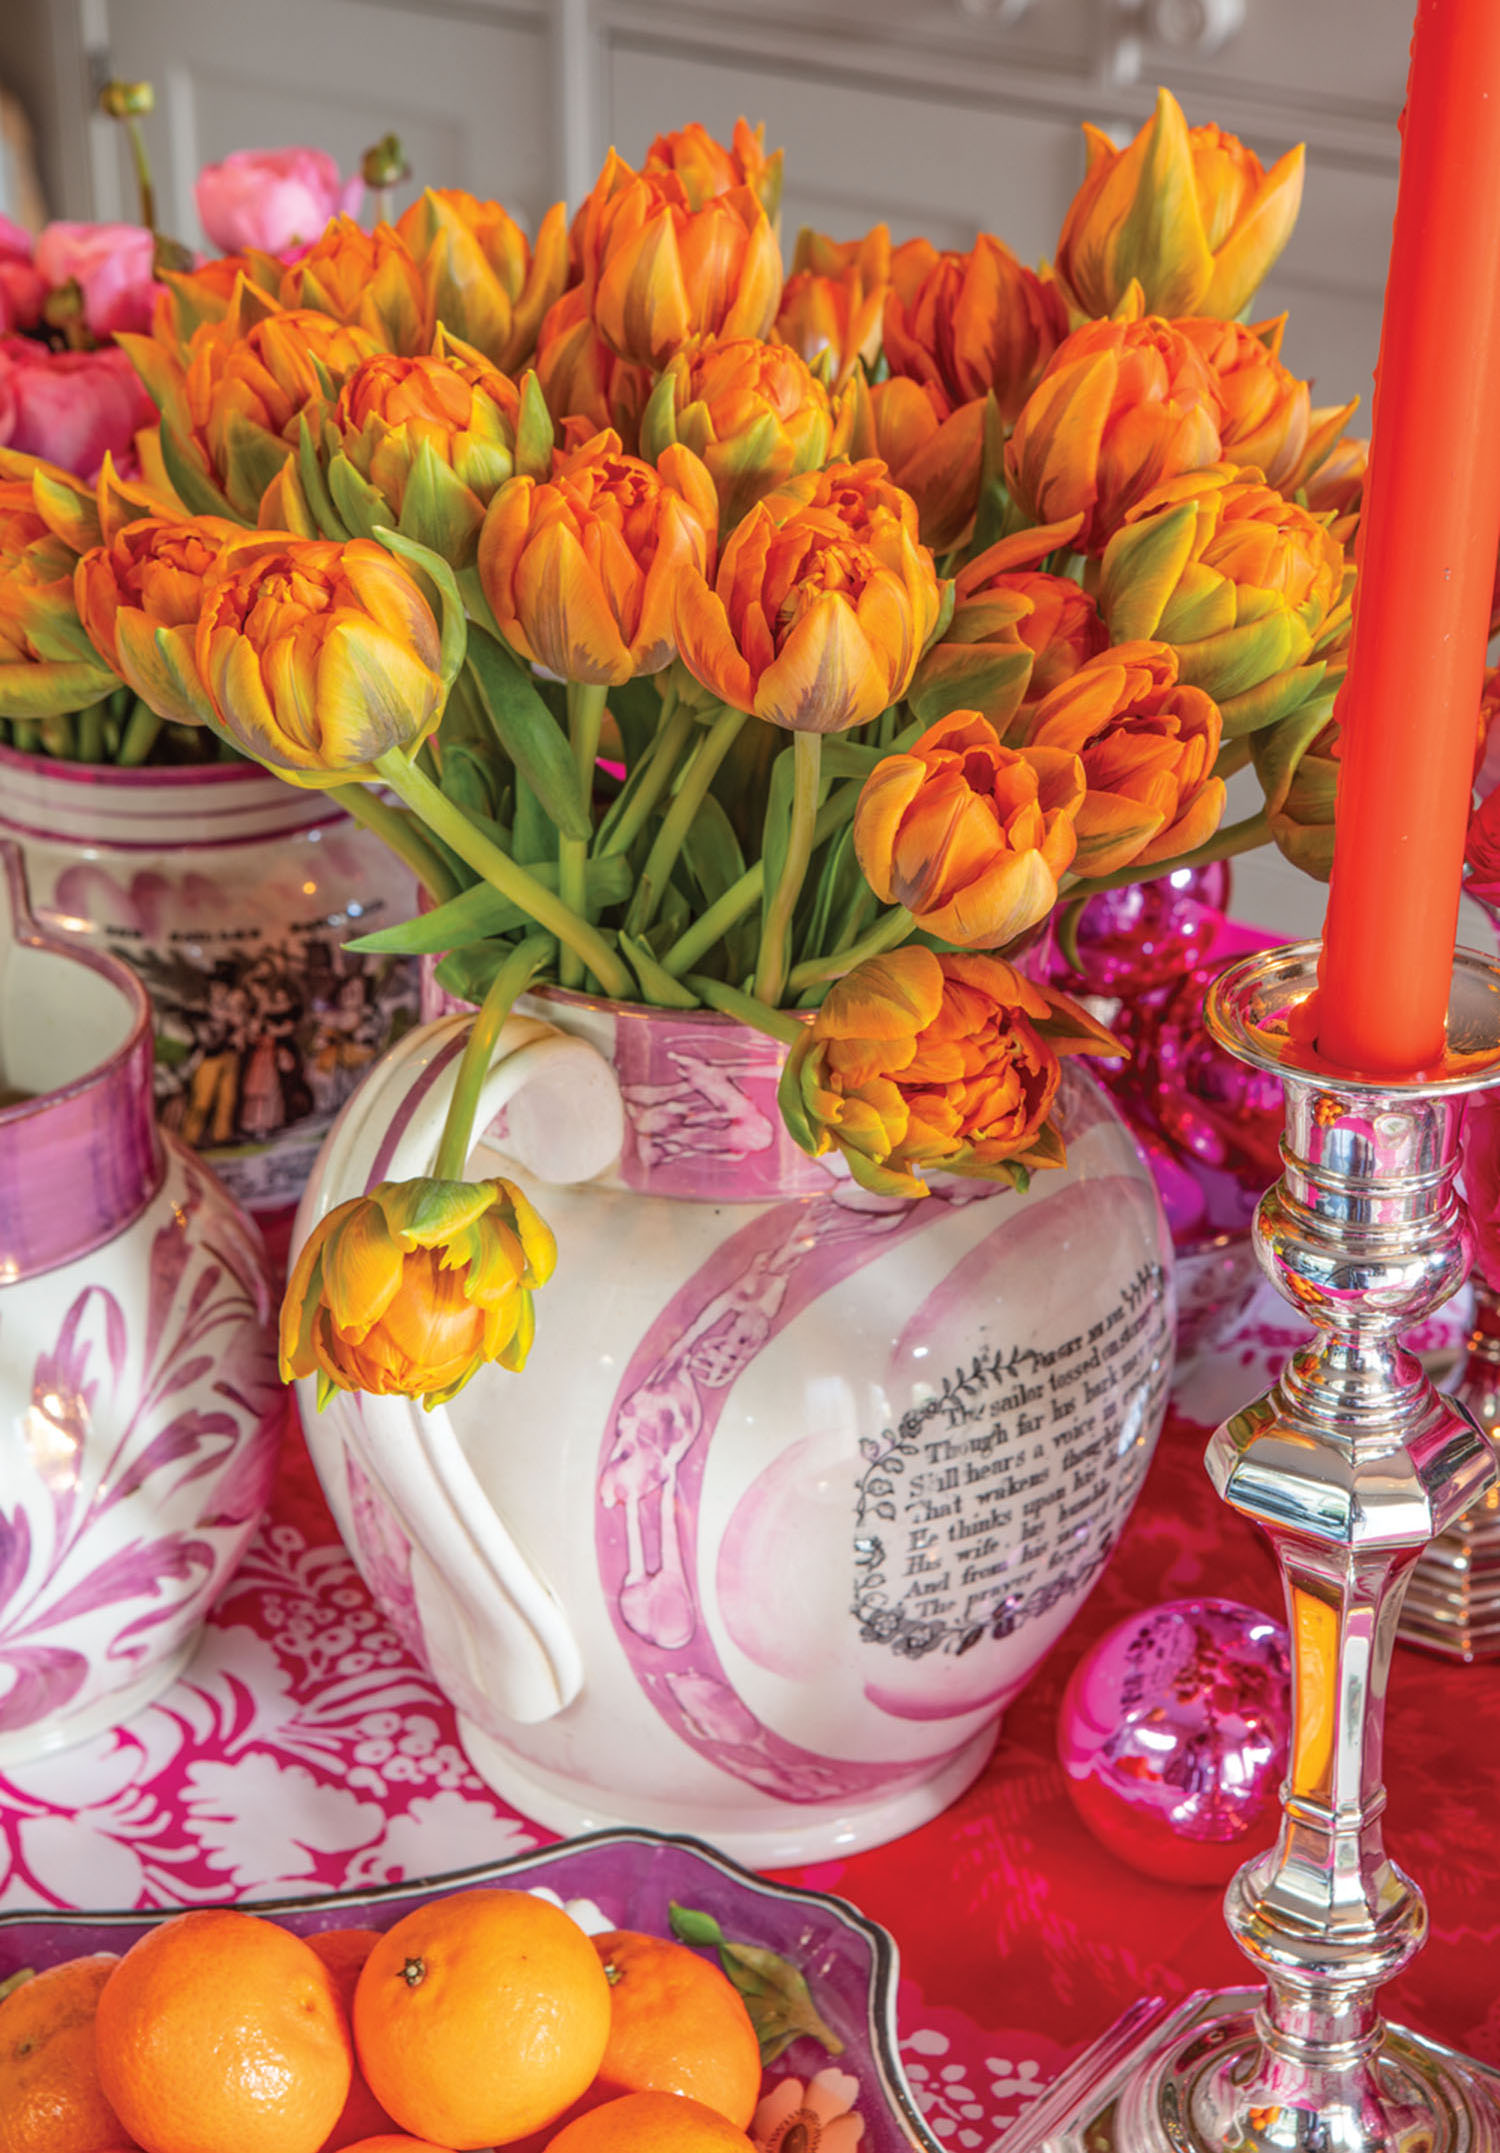 Orange tulips, candlesticks, and citrus dazzle against the pink tablecloth.